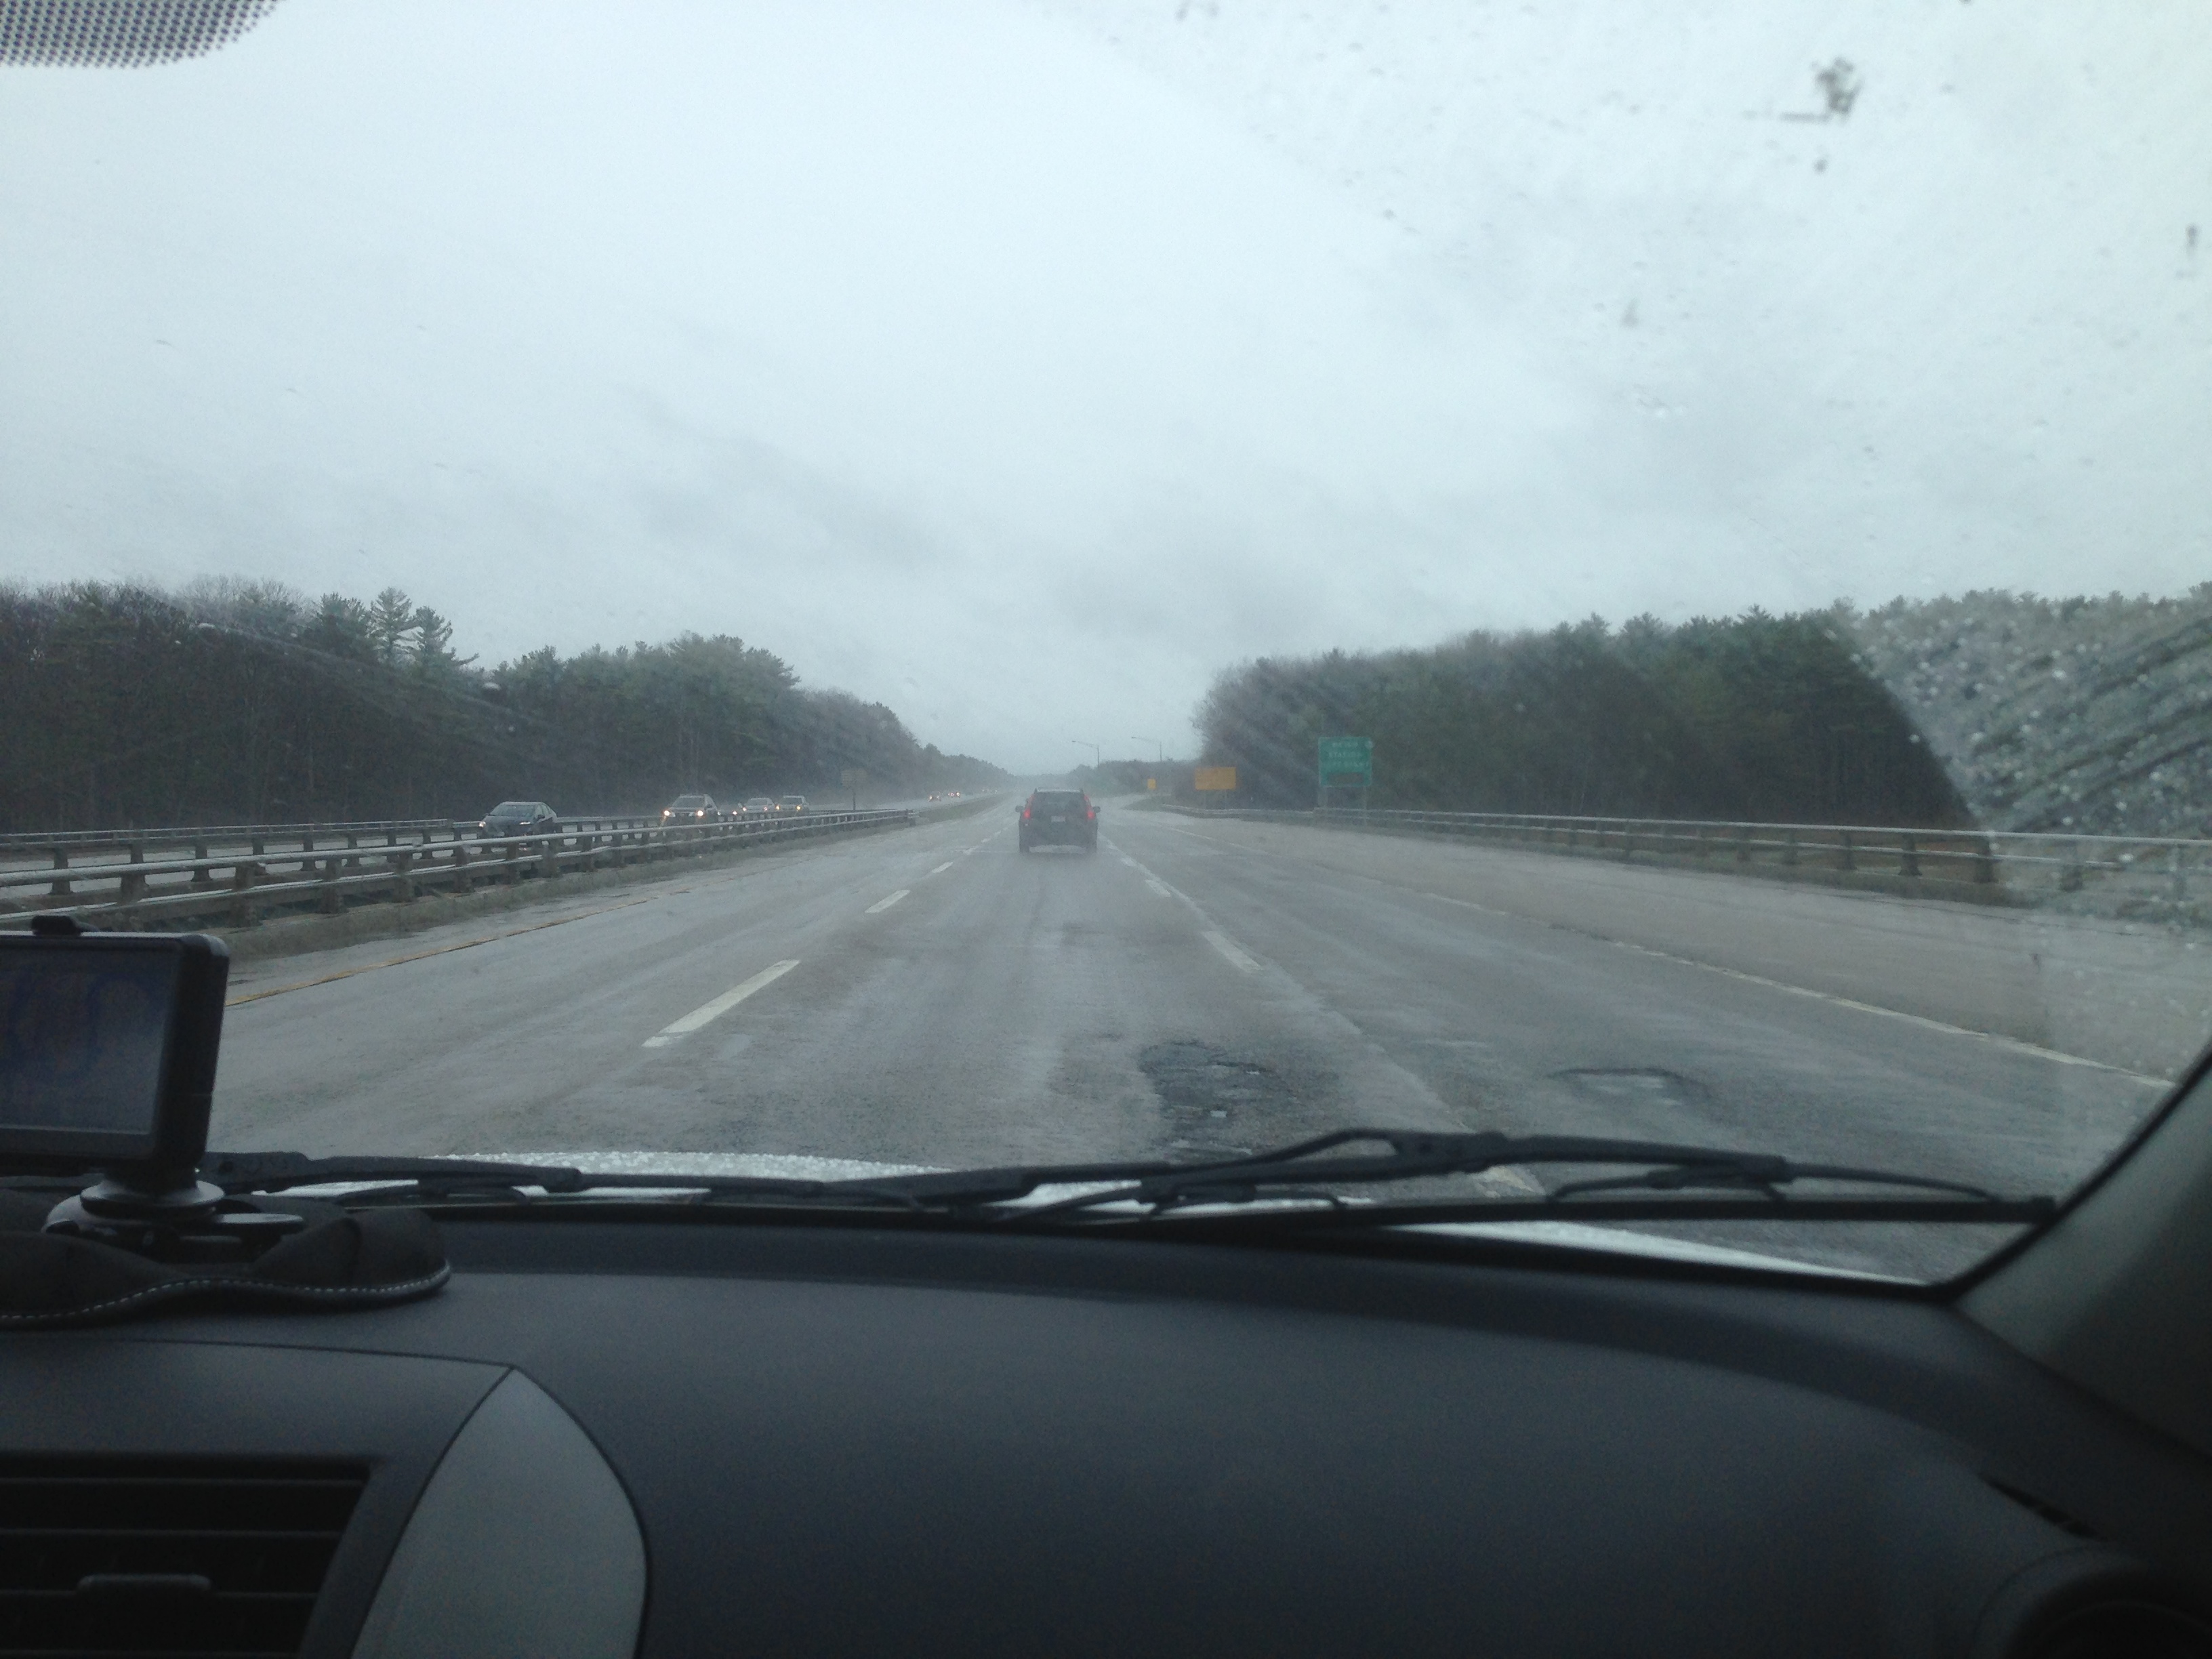 The dreary road to Ogunquit.